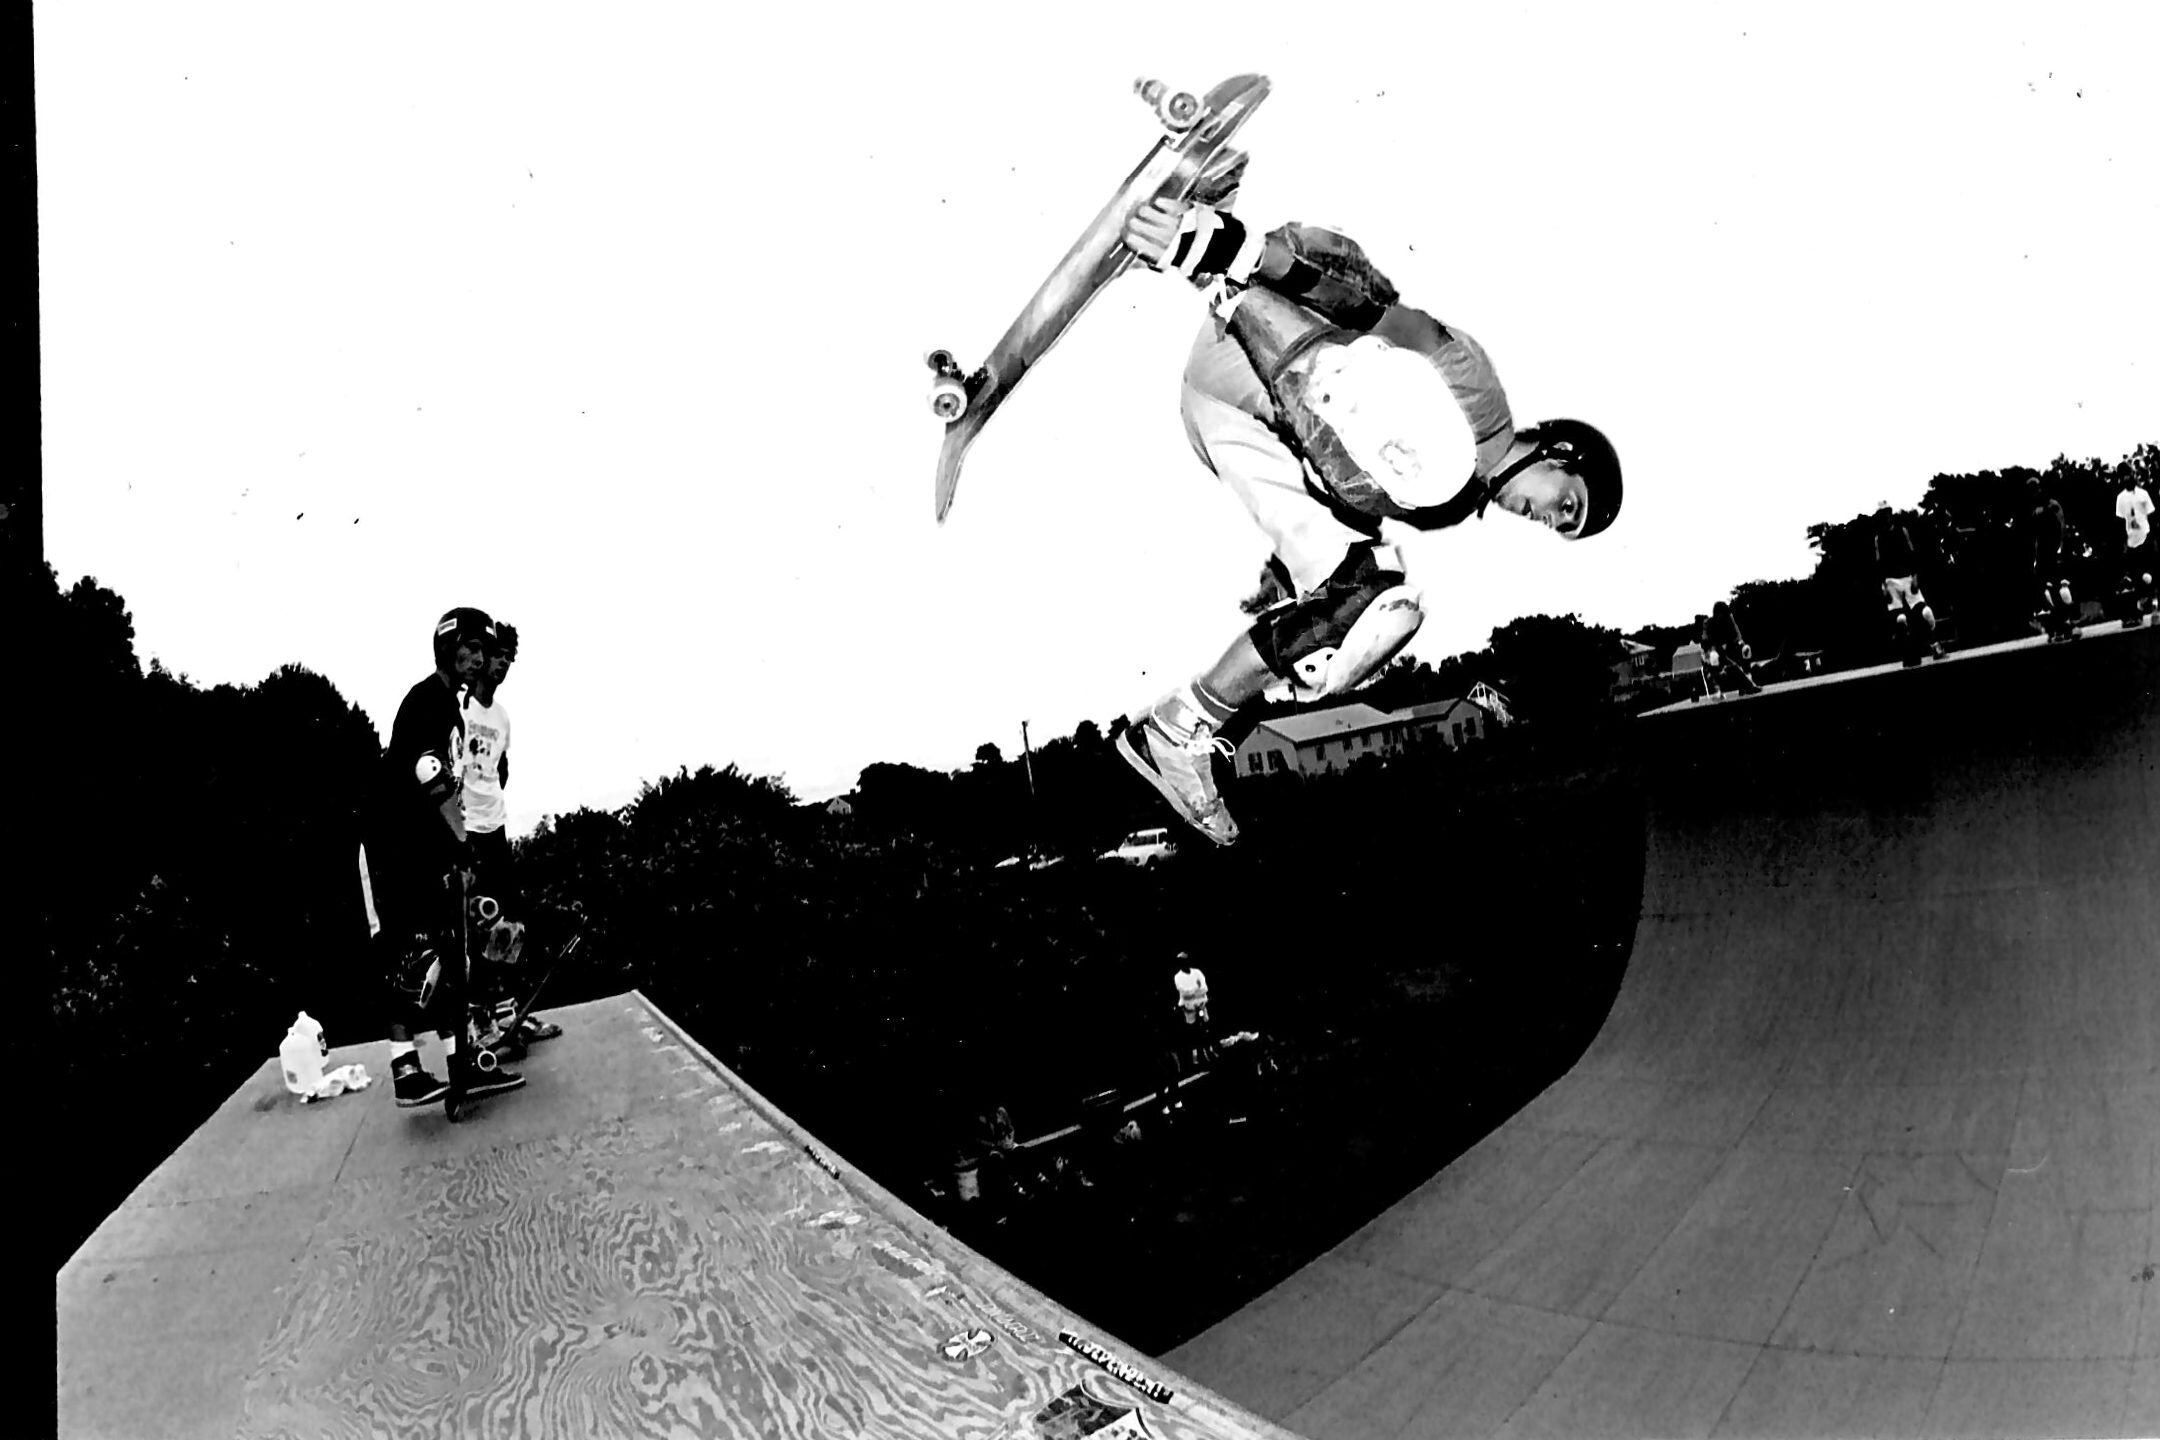 Onefooted Weddle air 1987 Newport RI ( The dog pisser) through the the late 80s and early 90s The Newport area had vert ramps, so we would travel there alot